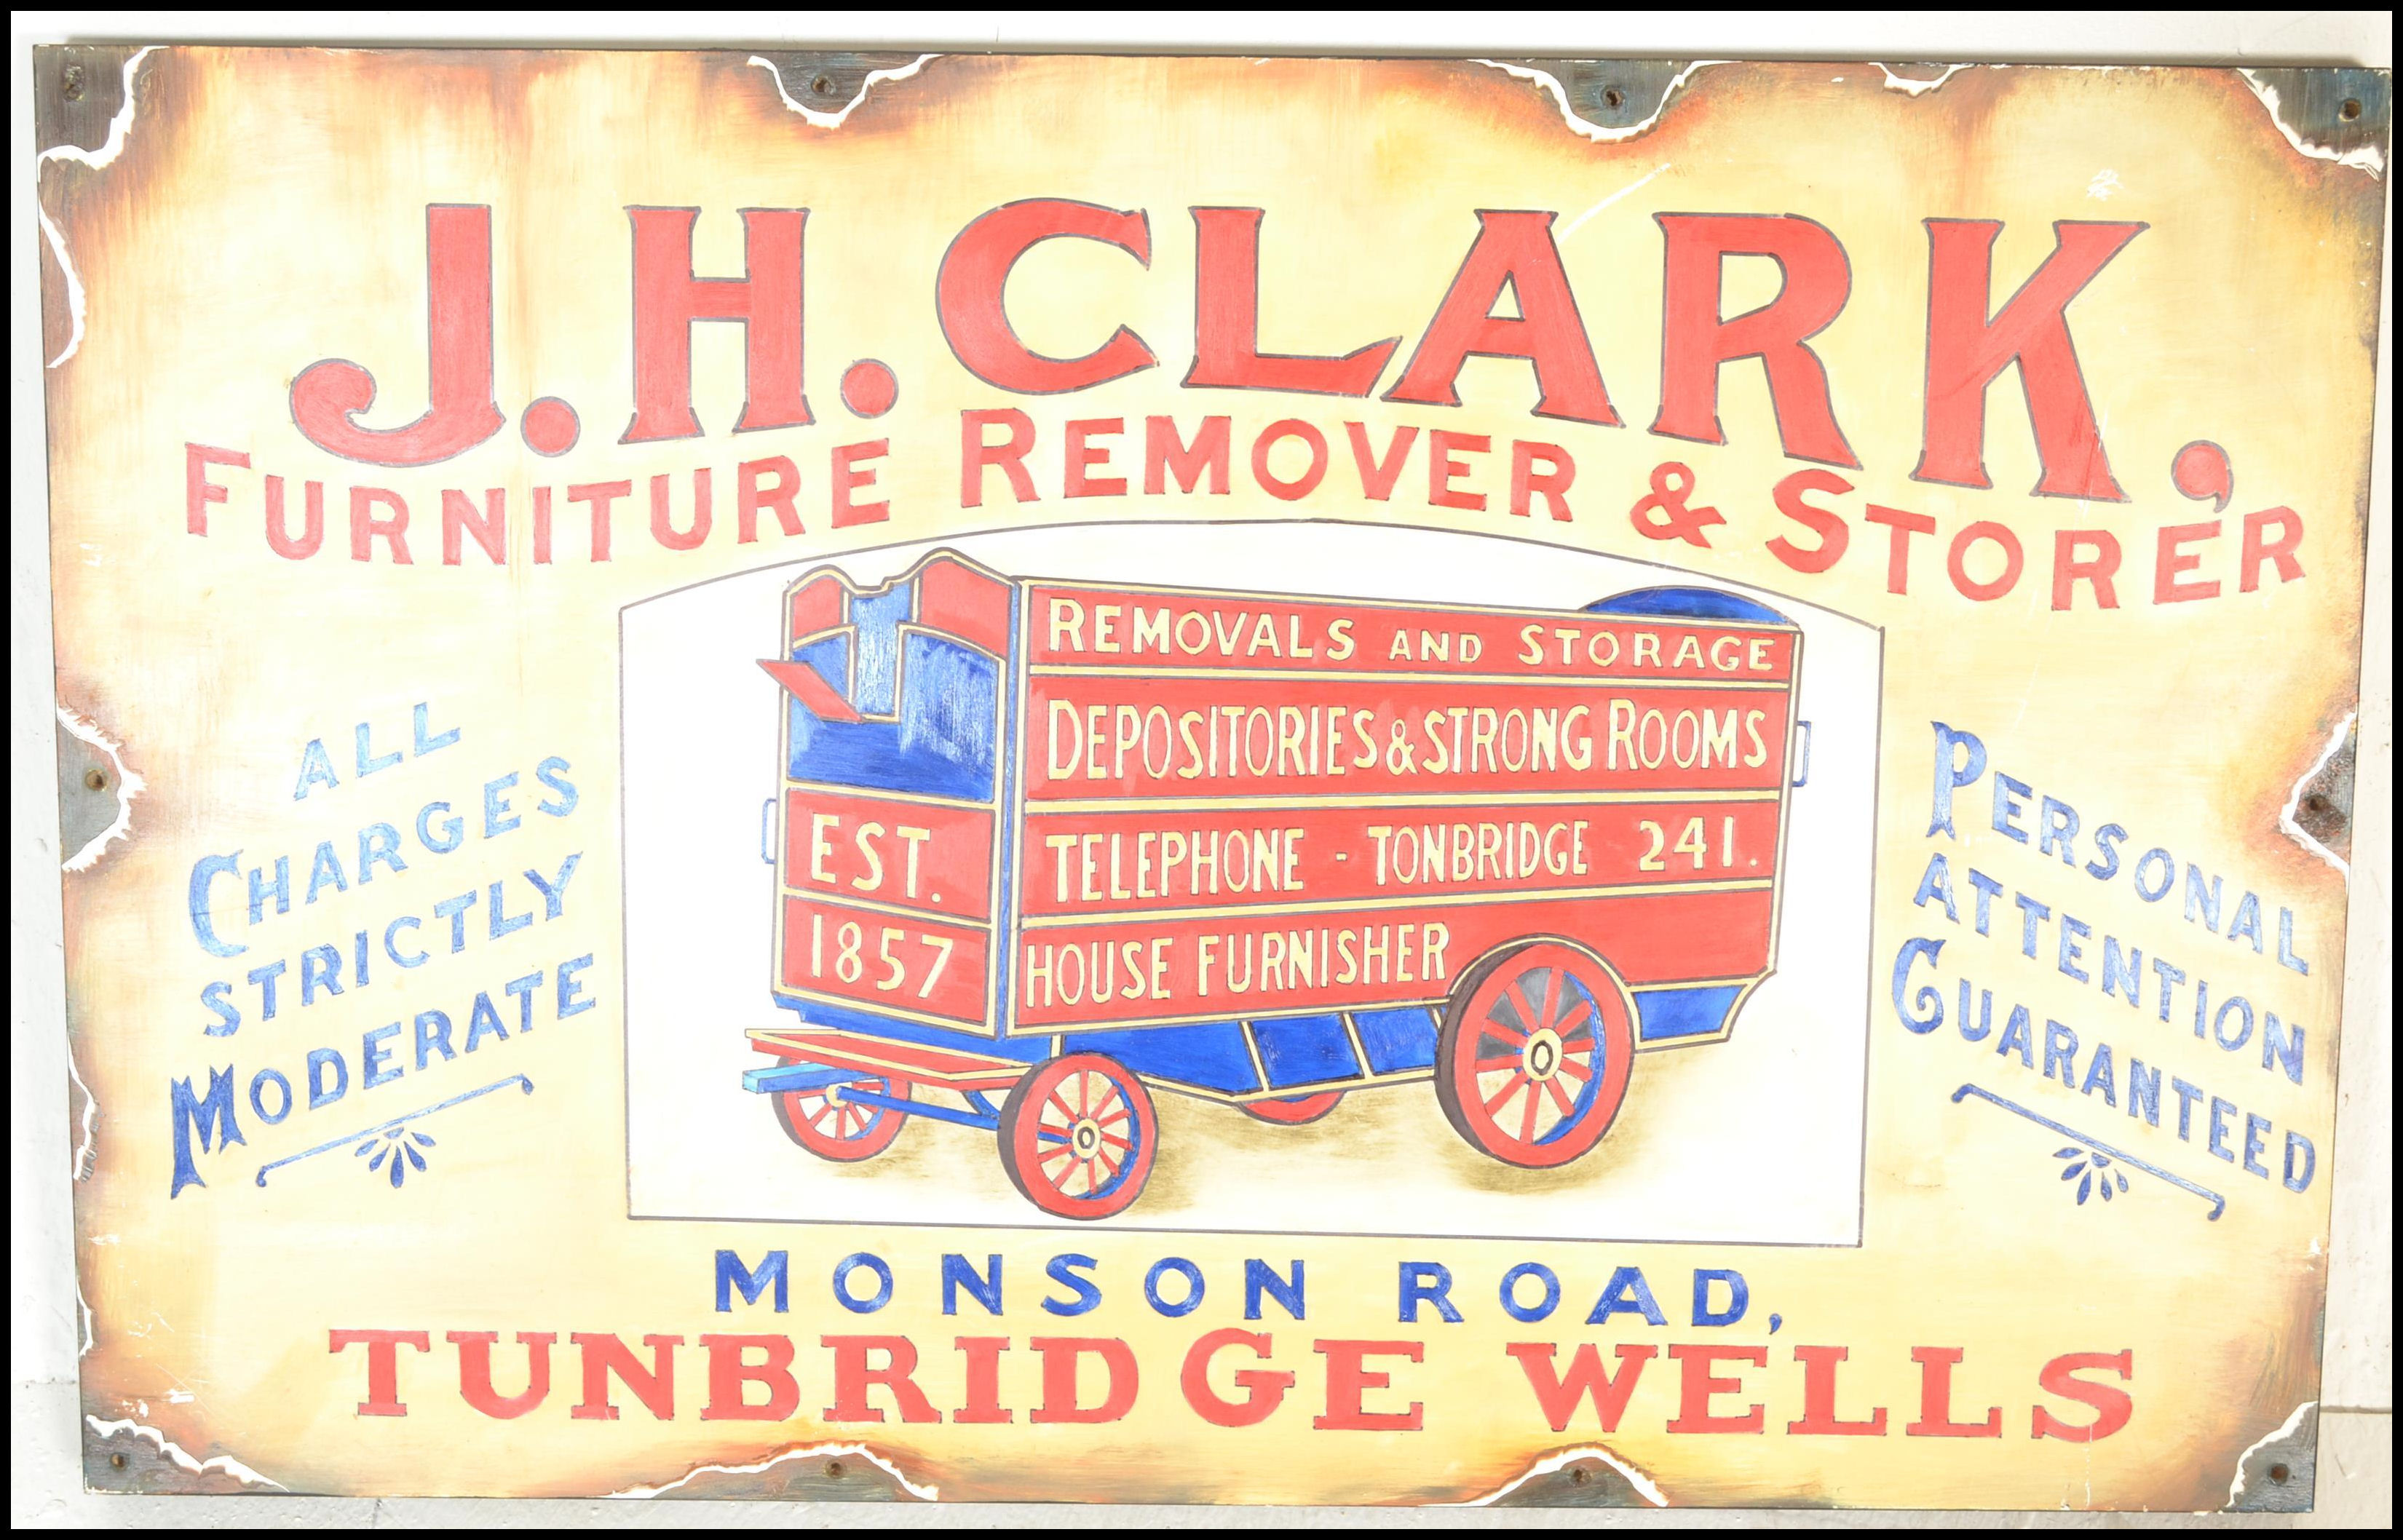 A contemporary artist's impression of a vintage enamel advertising sign for J. H. Clark furniture